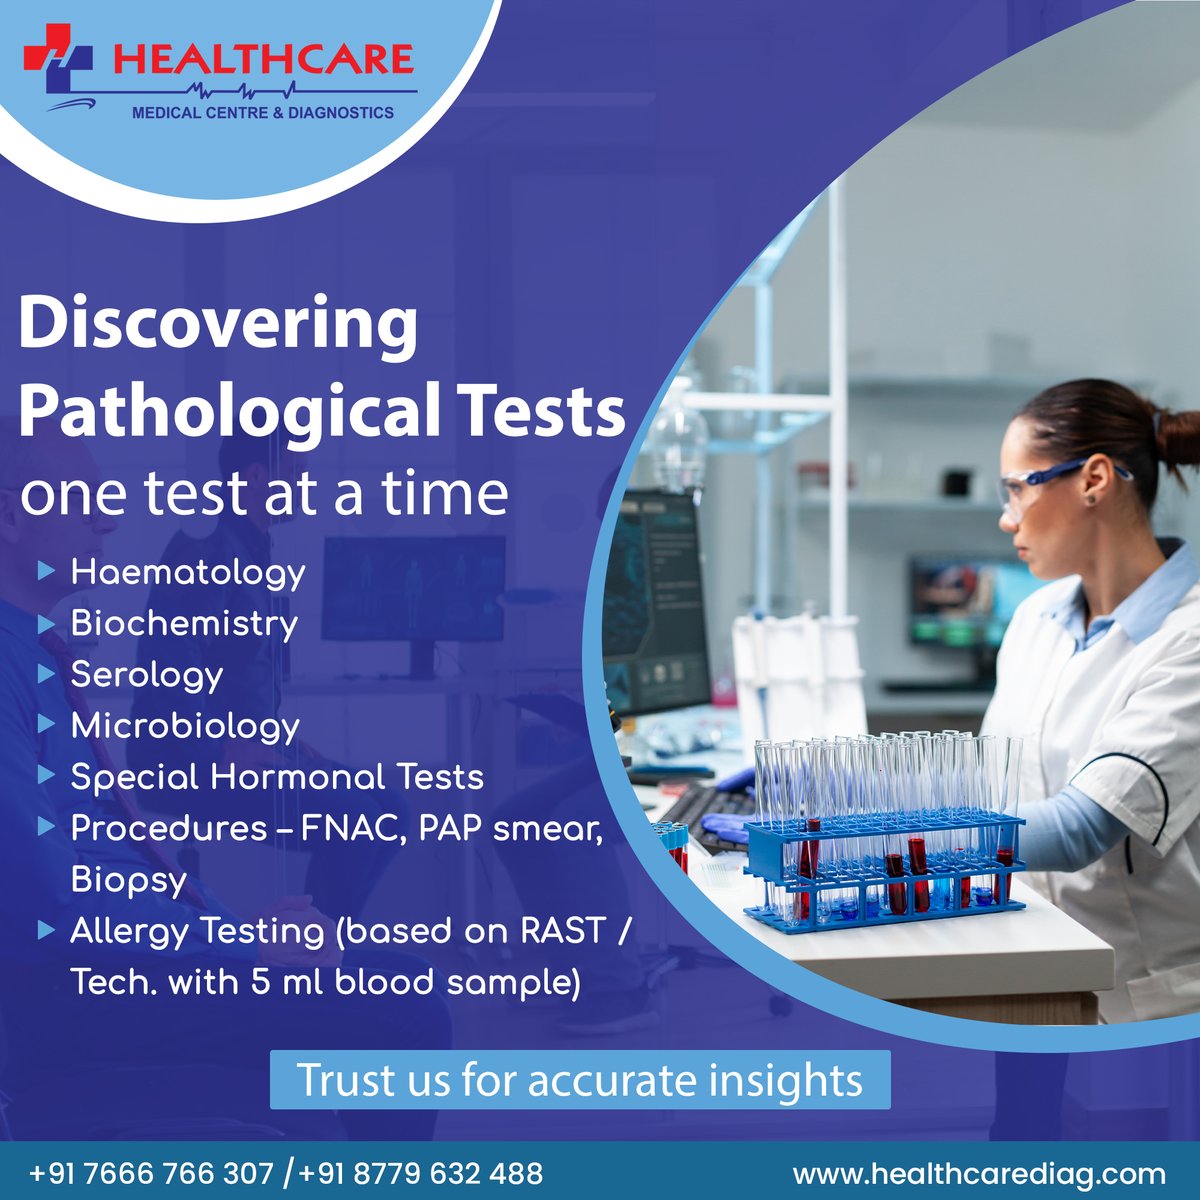 Empowering health decisions with precise Pathology Services. Your wellness journey starts here.

Book appointment through 📞8779632488 / 7666766307 / 9588617208

Visit our website healthcarediag.com to know more.

#healthcarediagnostics #pathologyservices #WellnessJourney